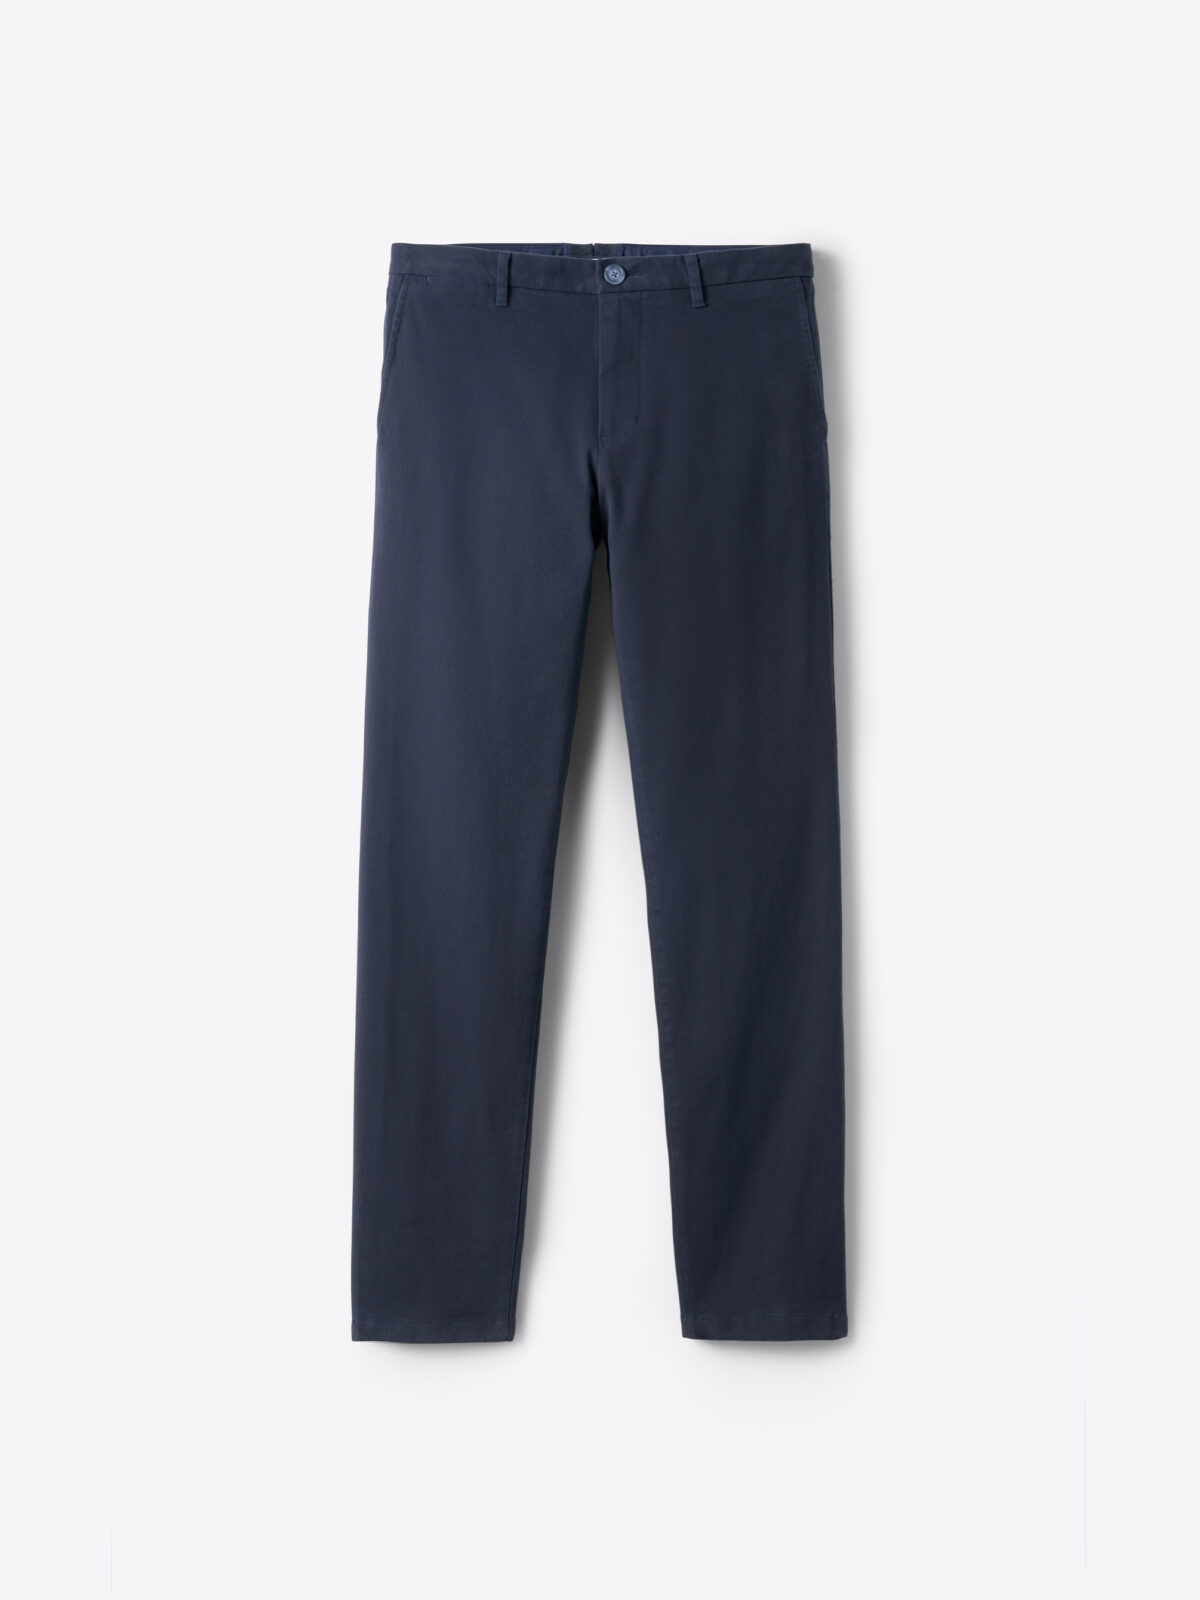 Buy Navy Blue Slim Stretch Chino Trousers from Next India